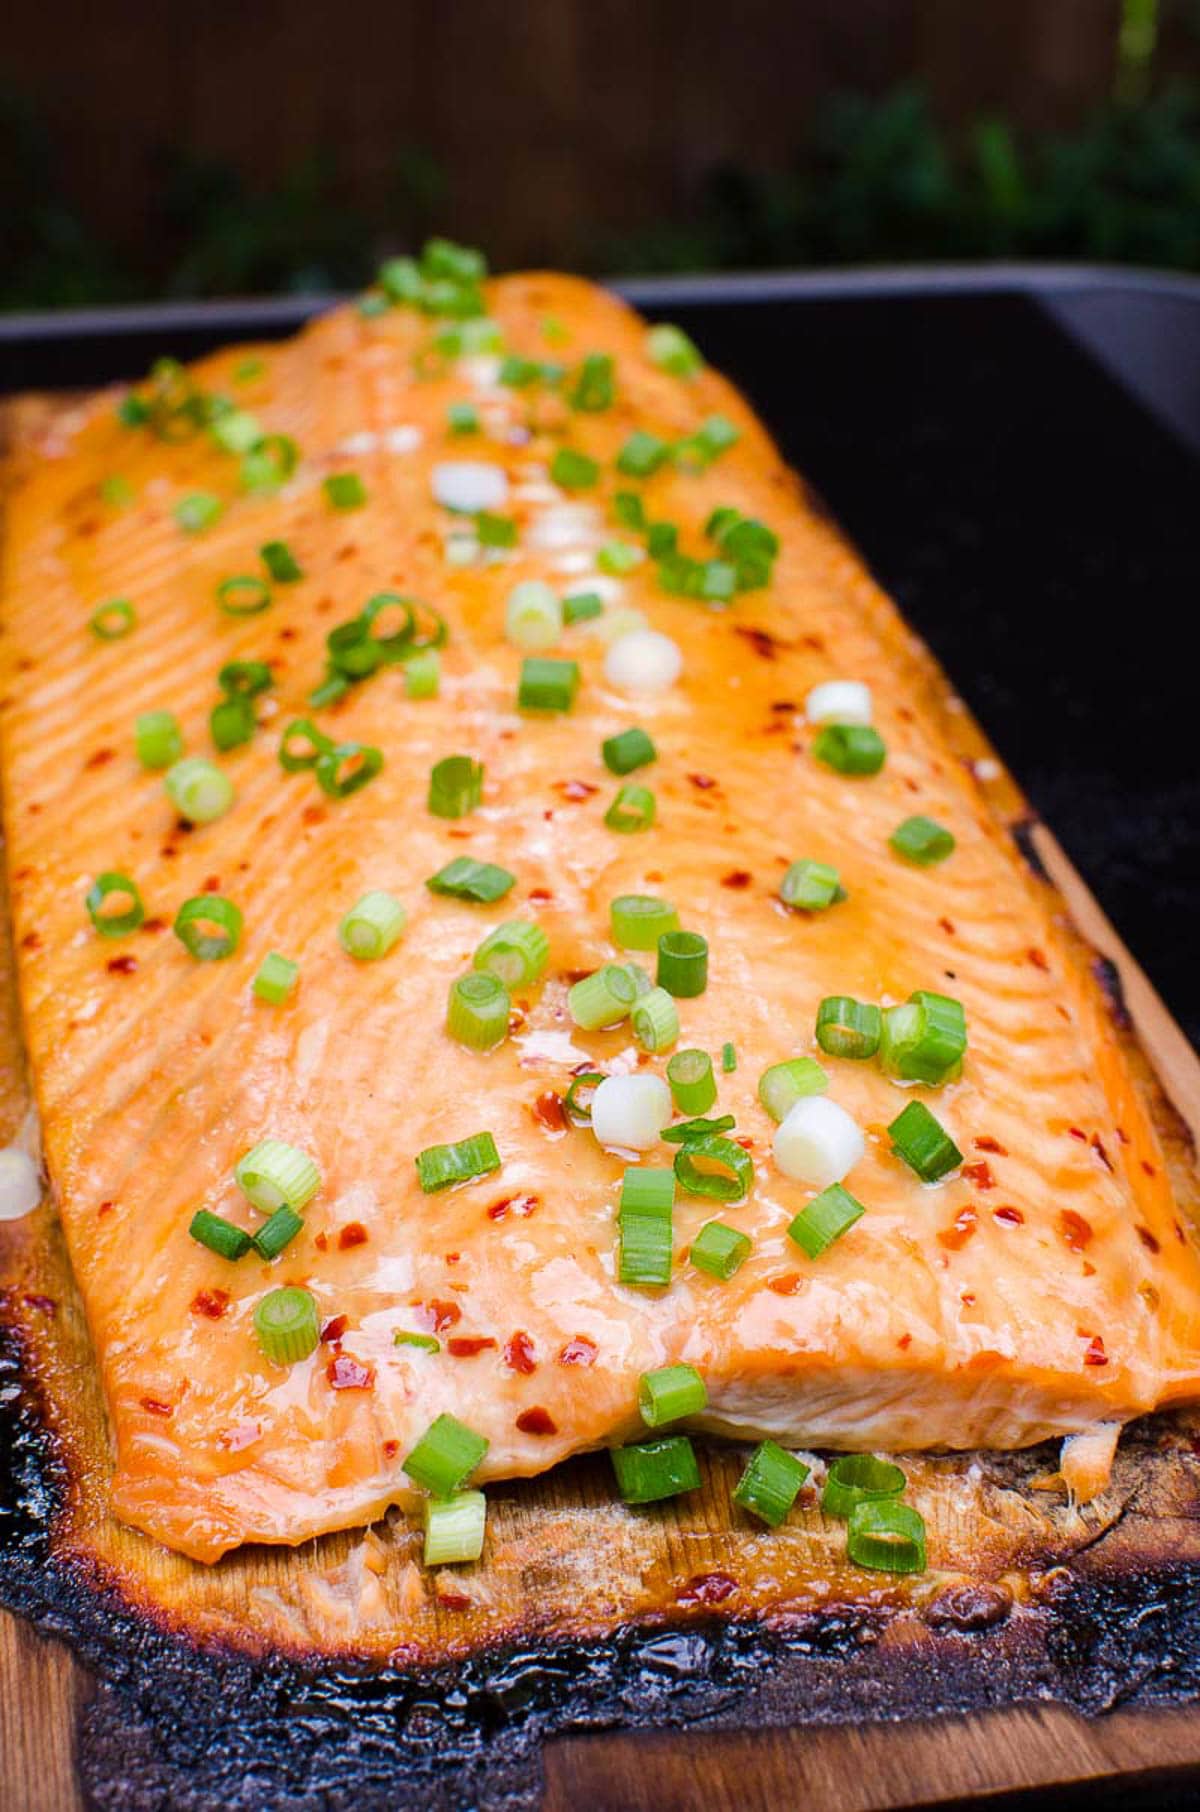 Grilled salmon fillet on a cedar plank coated in sauce and garnished with green onion.